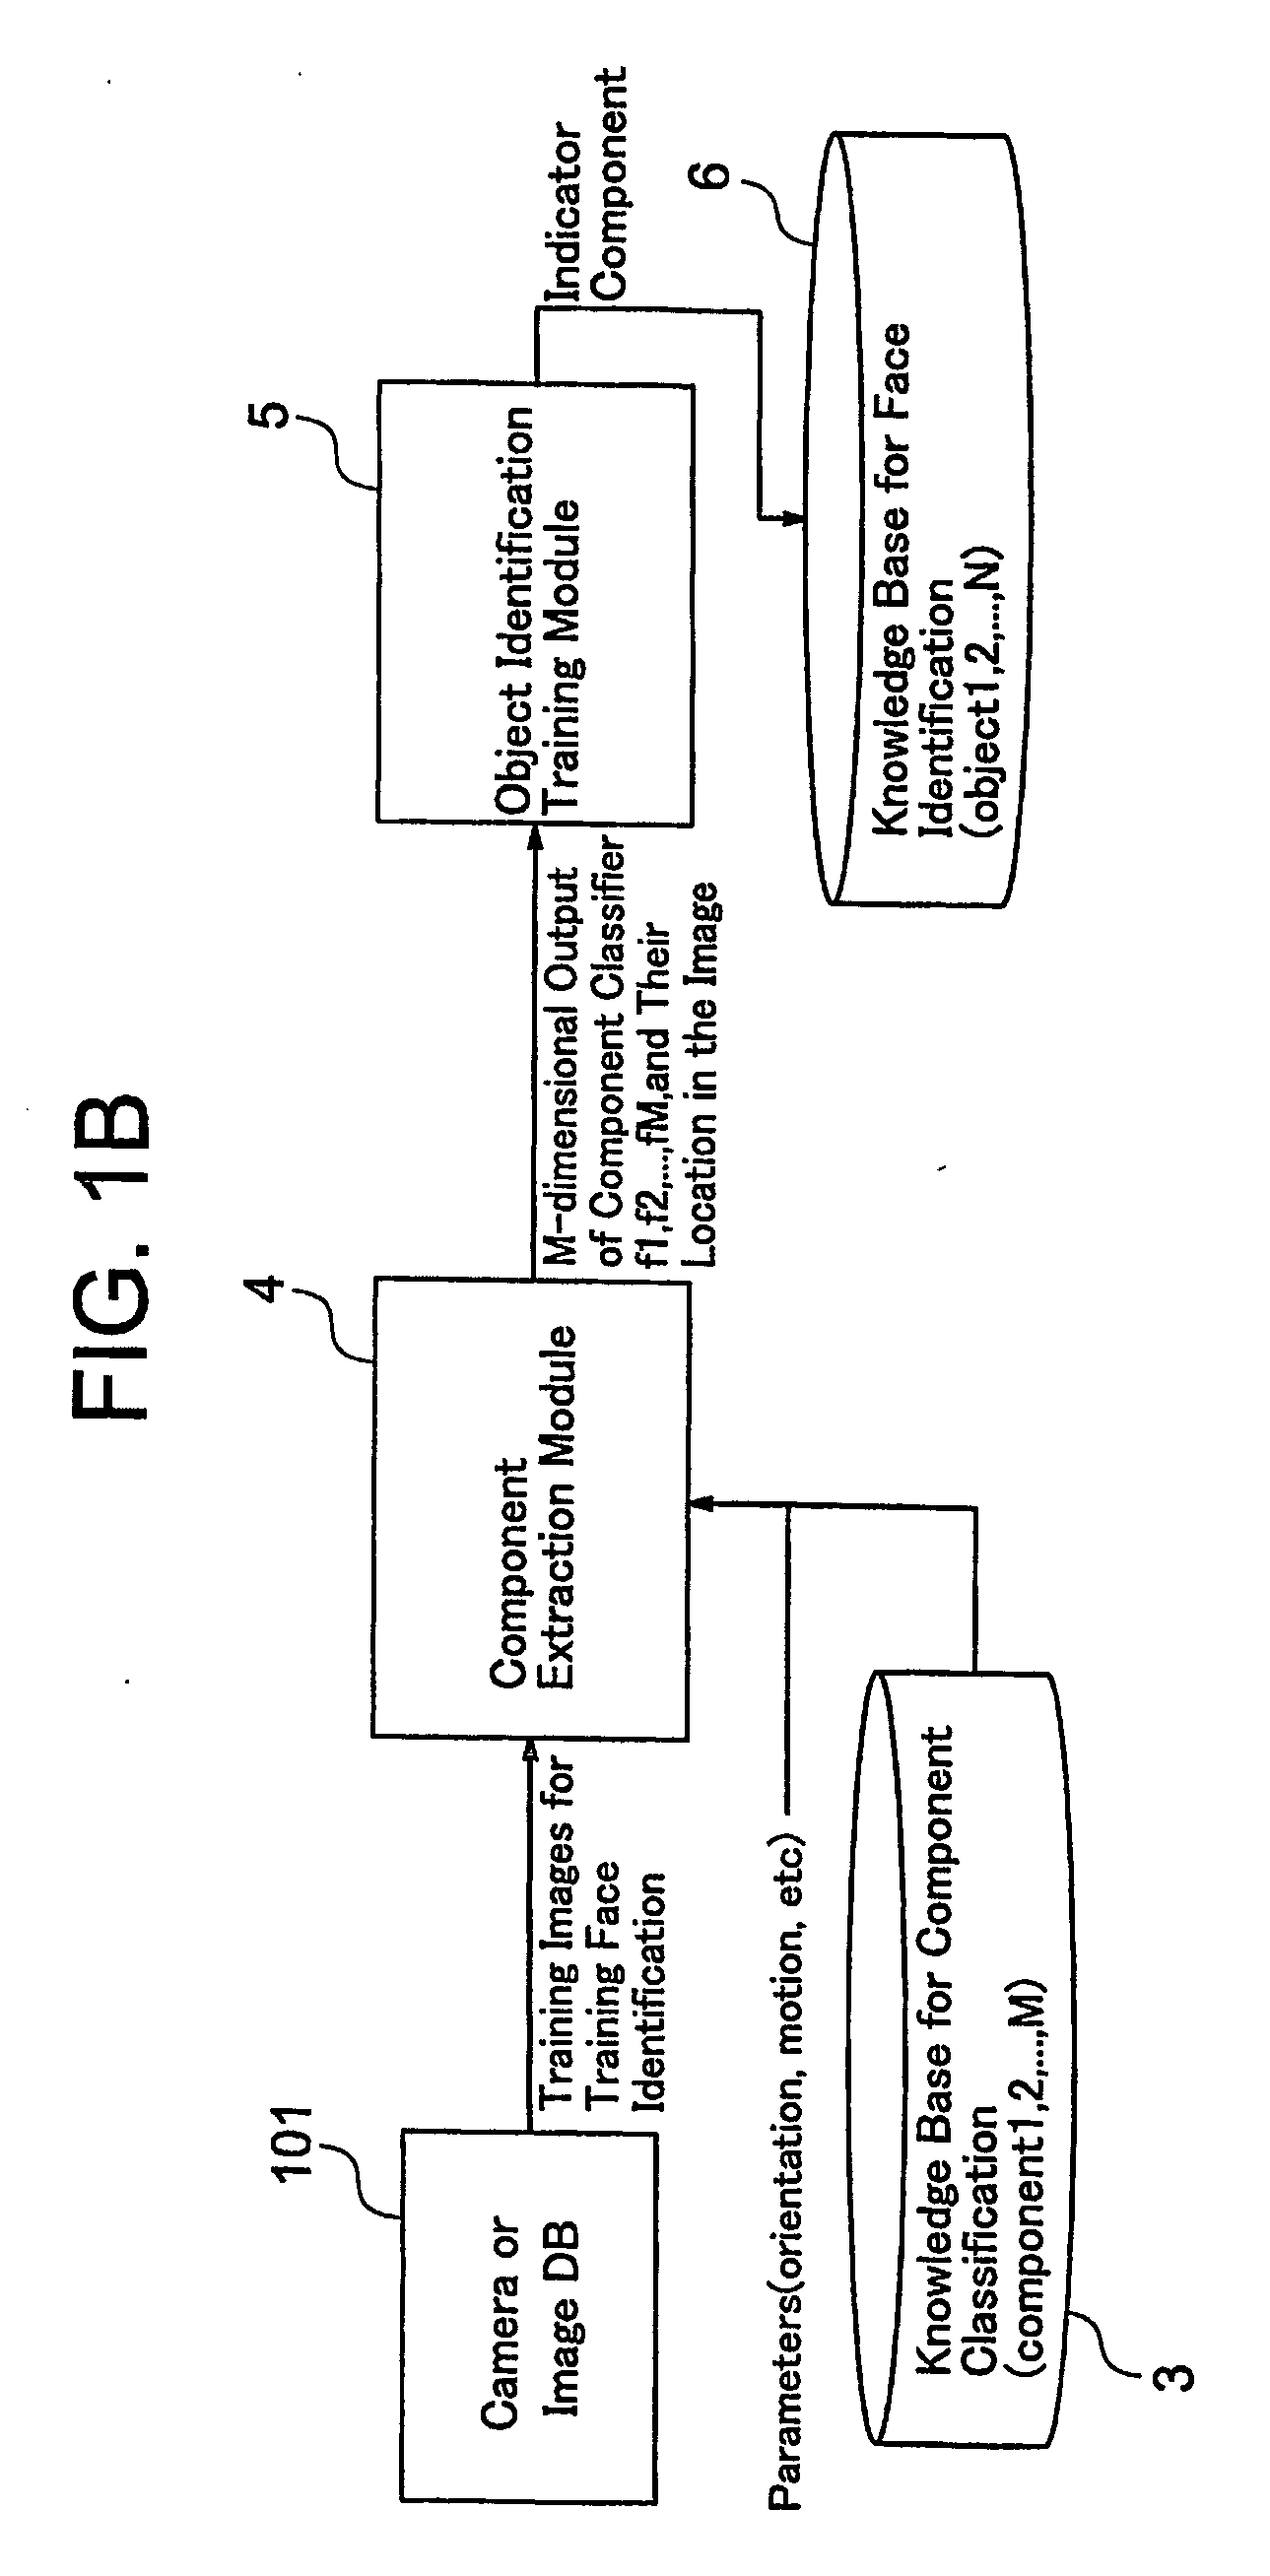 System and method for face recognition